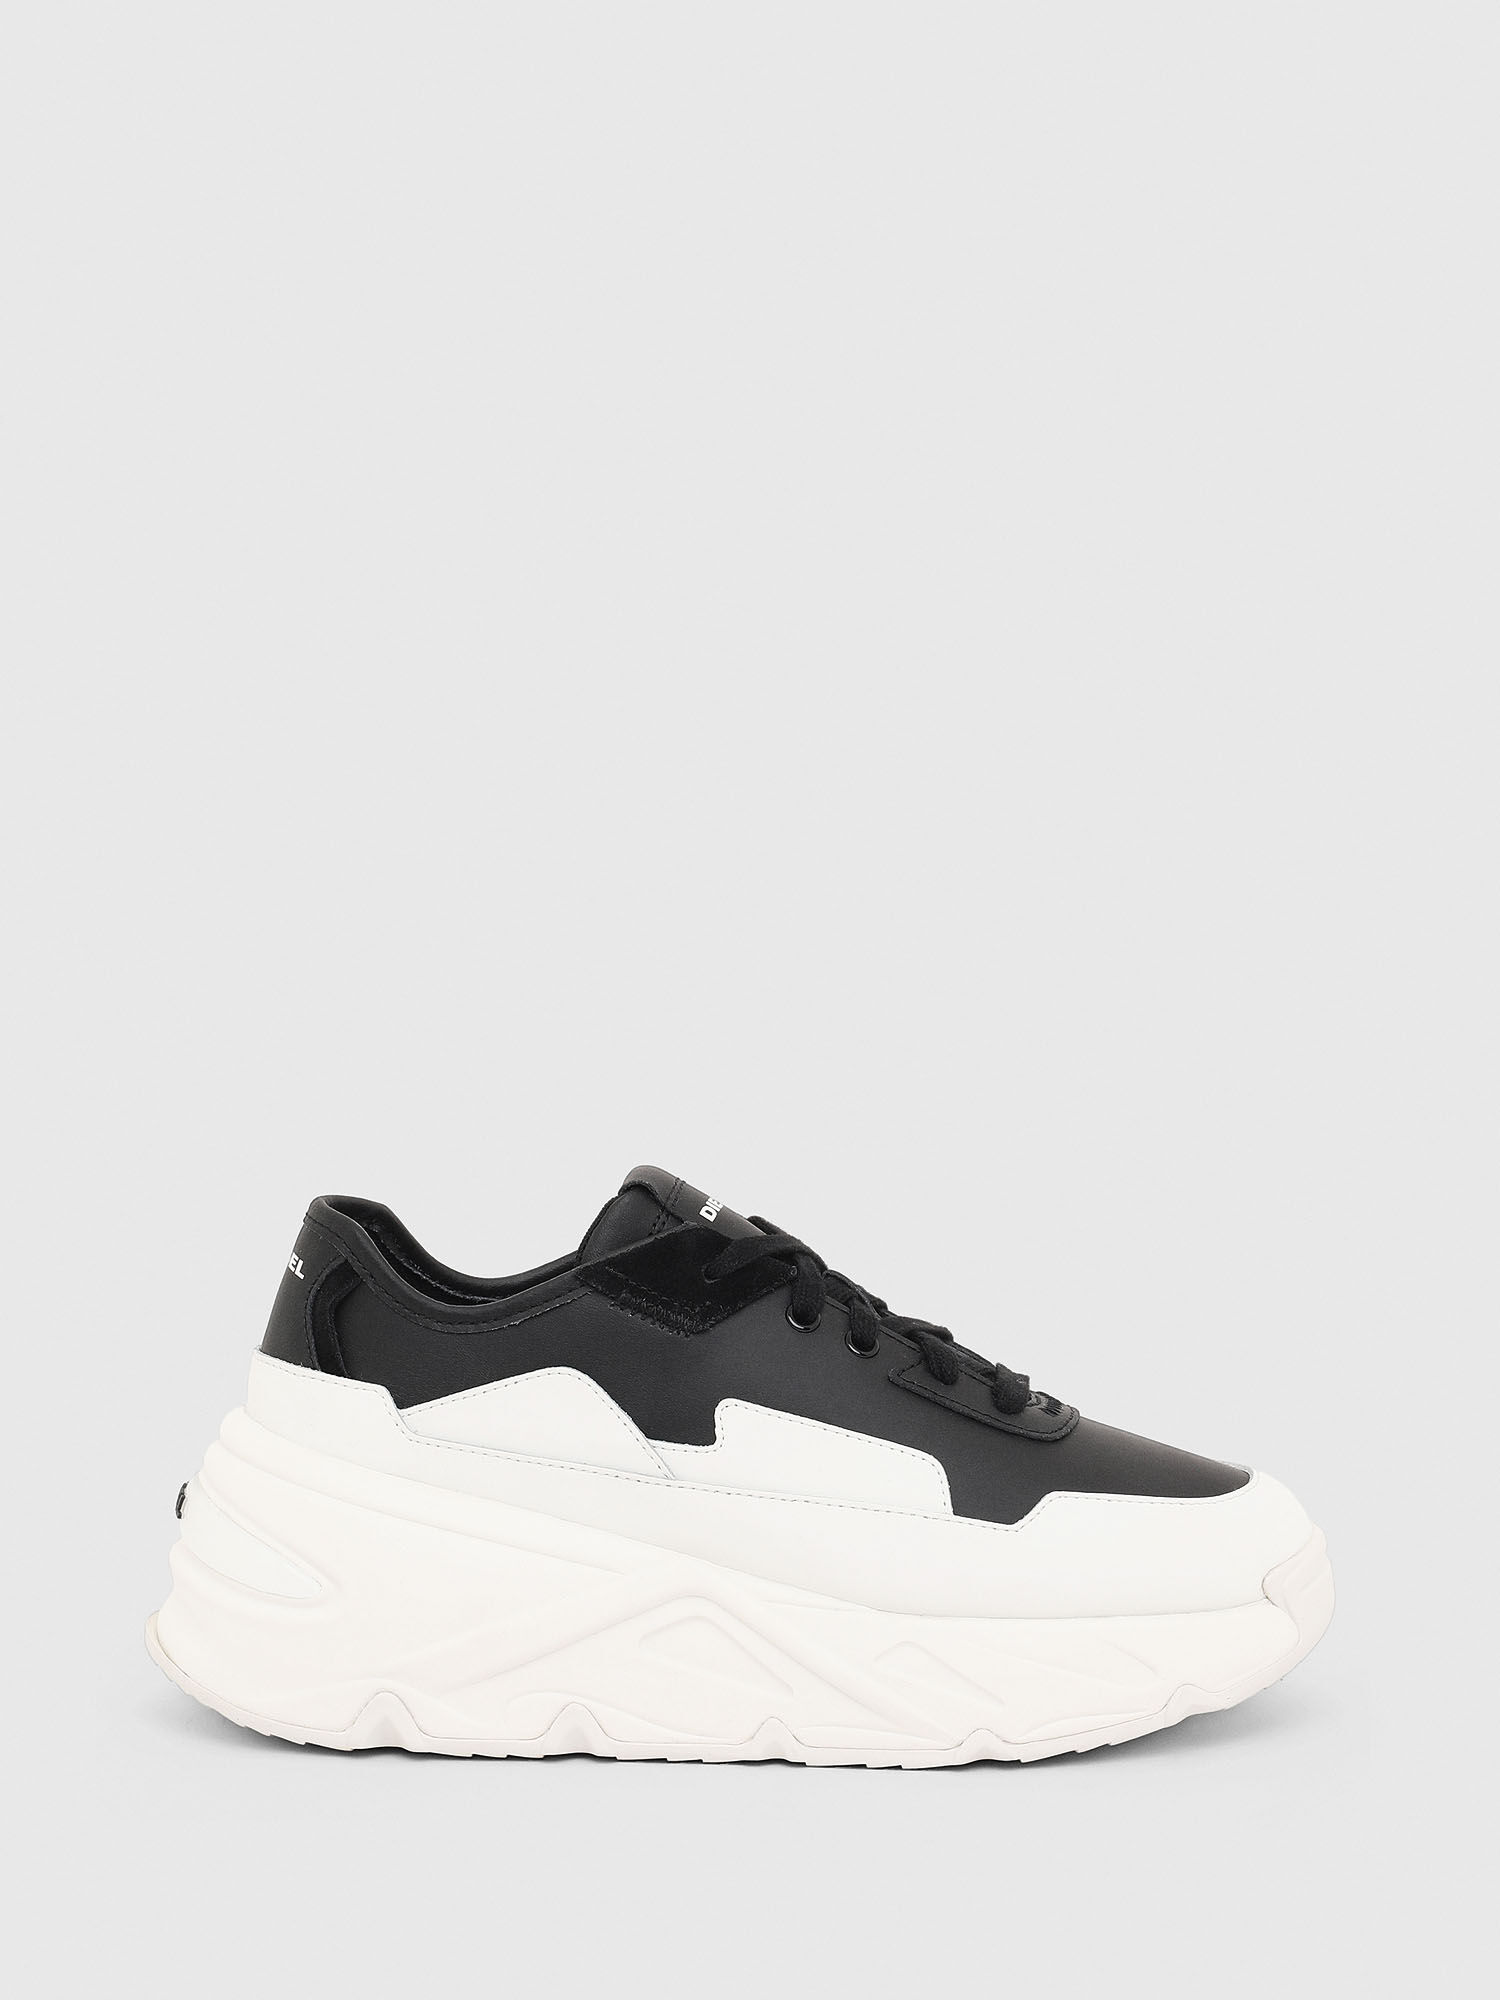 chunky sneakers black and white